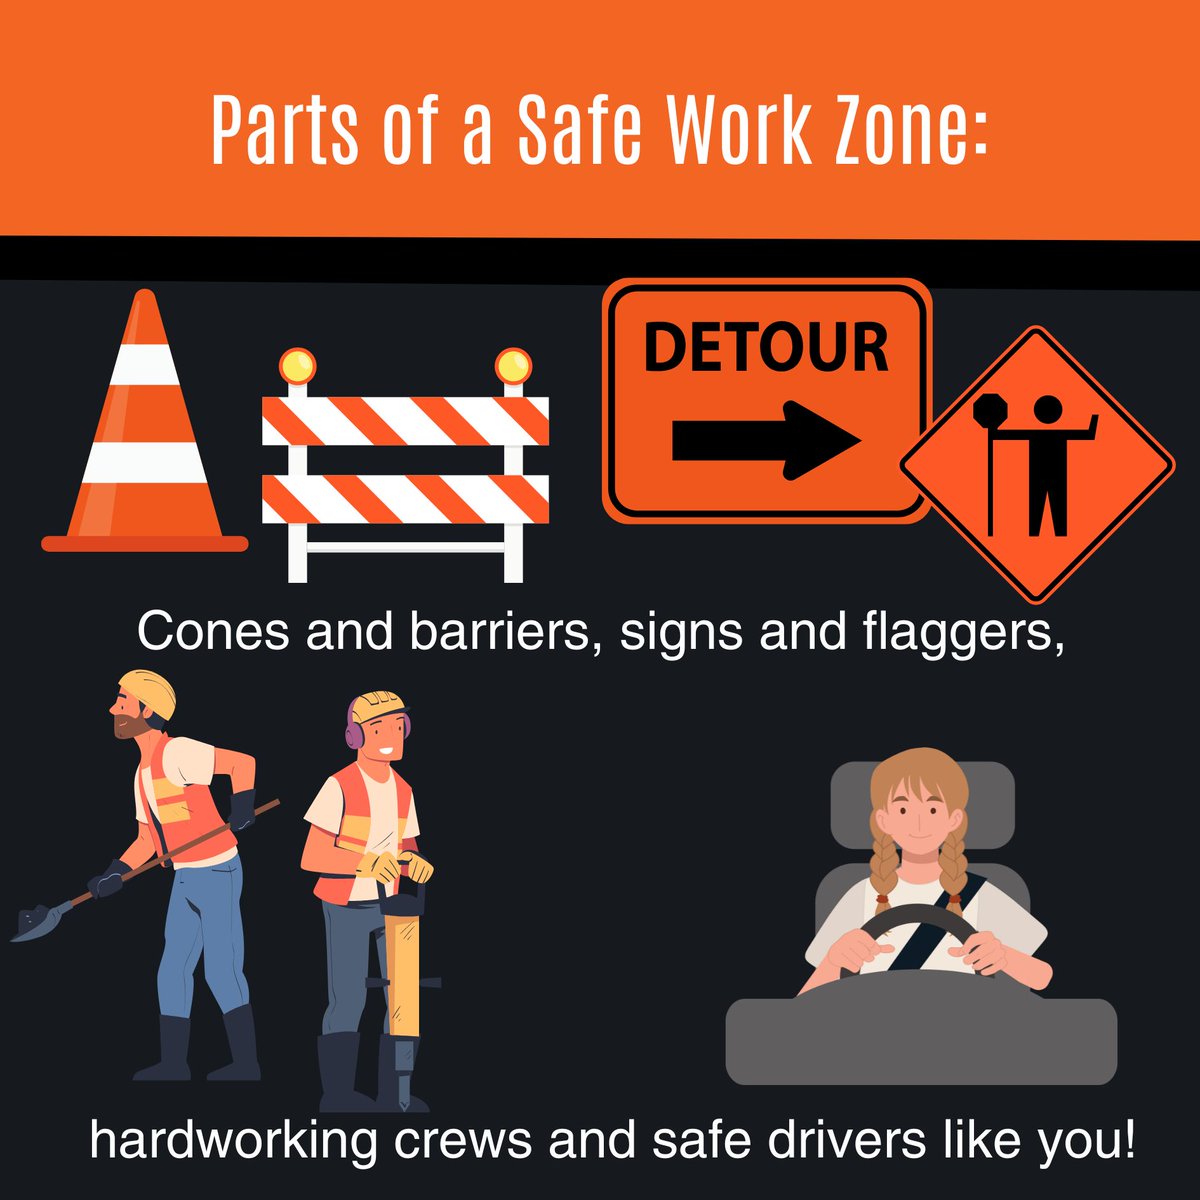 Orange cones, barriers, signage, flaggers, hardworking crews and attentive drivers, like you, are all a part of a safe work zone. We all have to work together to make work zones safer places!

#WorkZoneSafety #RoadSafety #DriveSafe #SlowDownForWorkZones #CT  #ObeyTheOrange